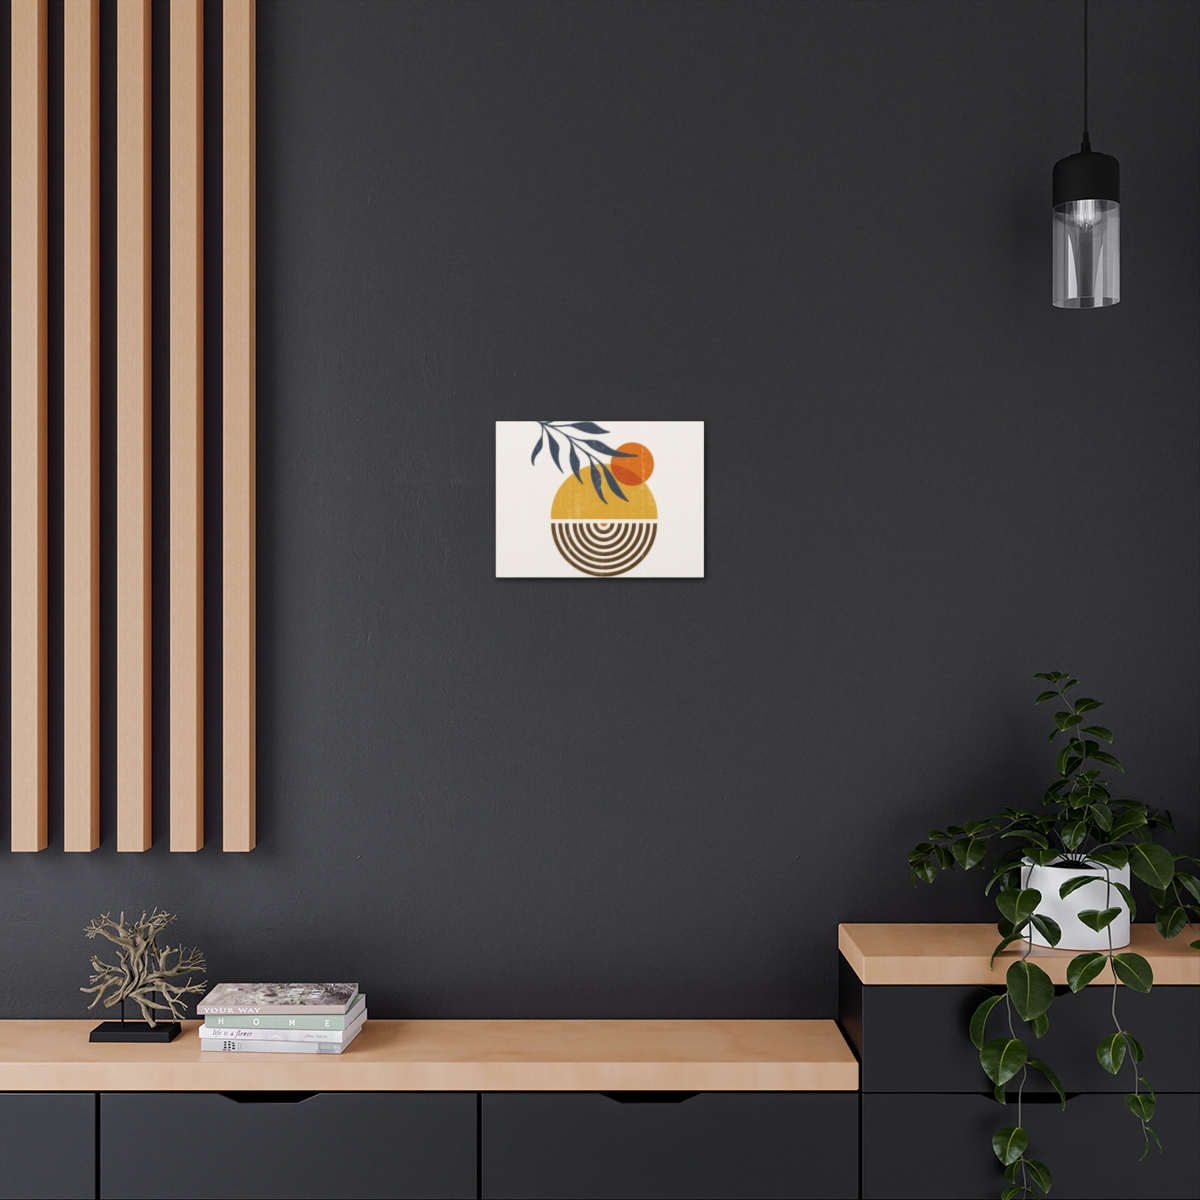 Canvas Gallery Wraps Brown Stripes product thumbnail image